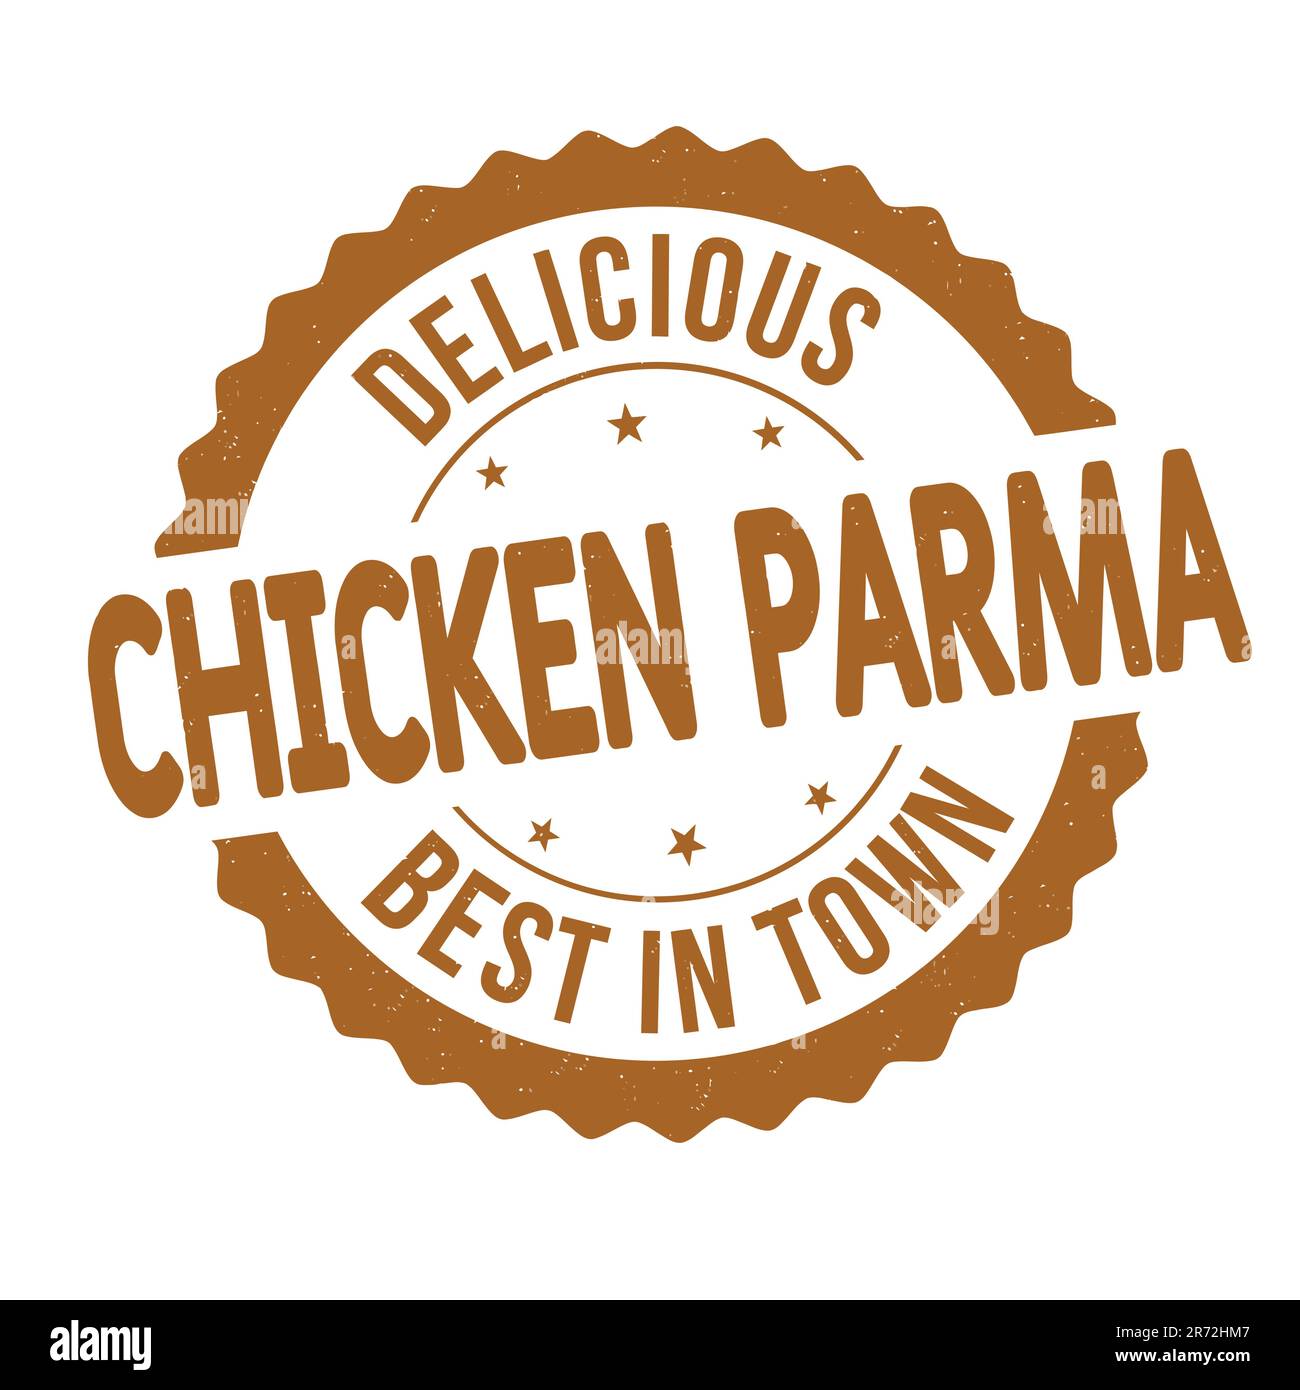 Chicken parma grunge rubber stamp on white background, vector illustration Stock Vector